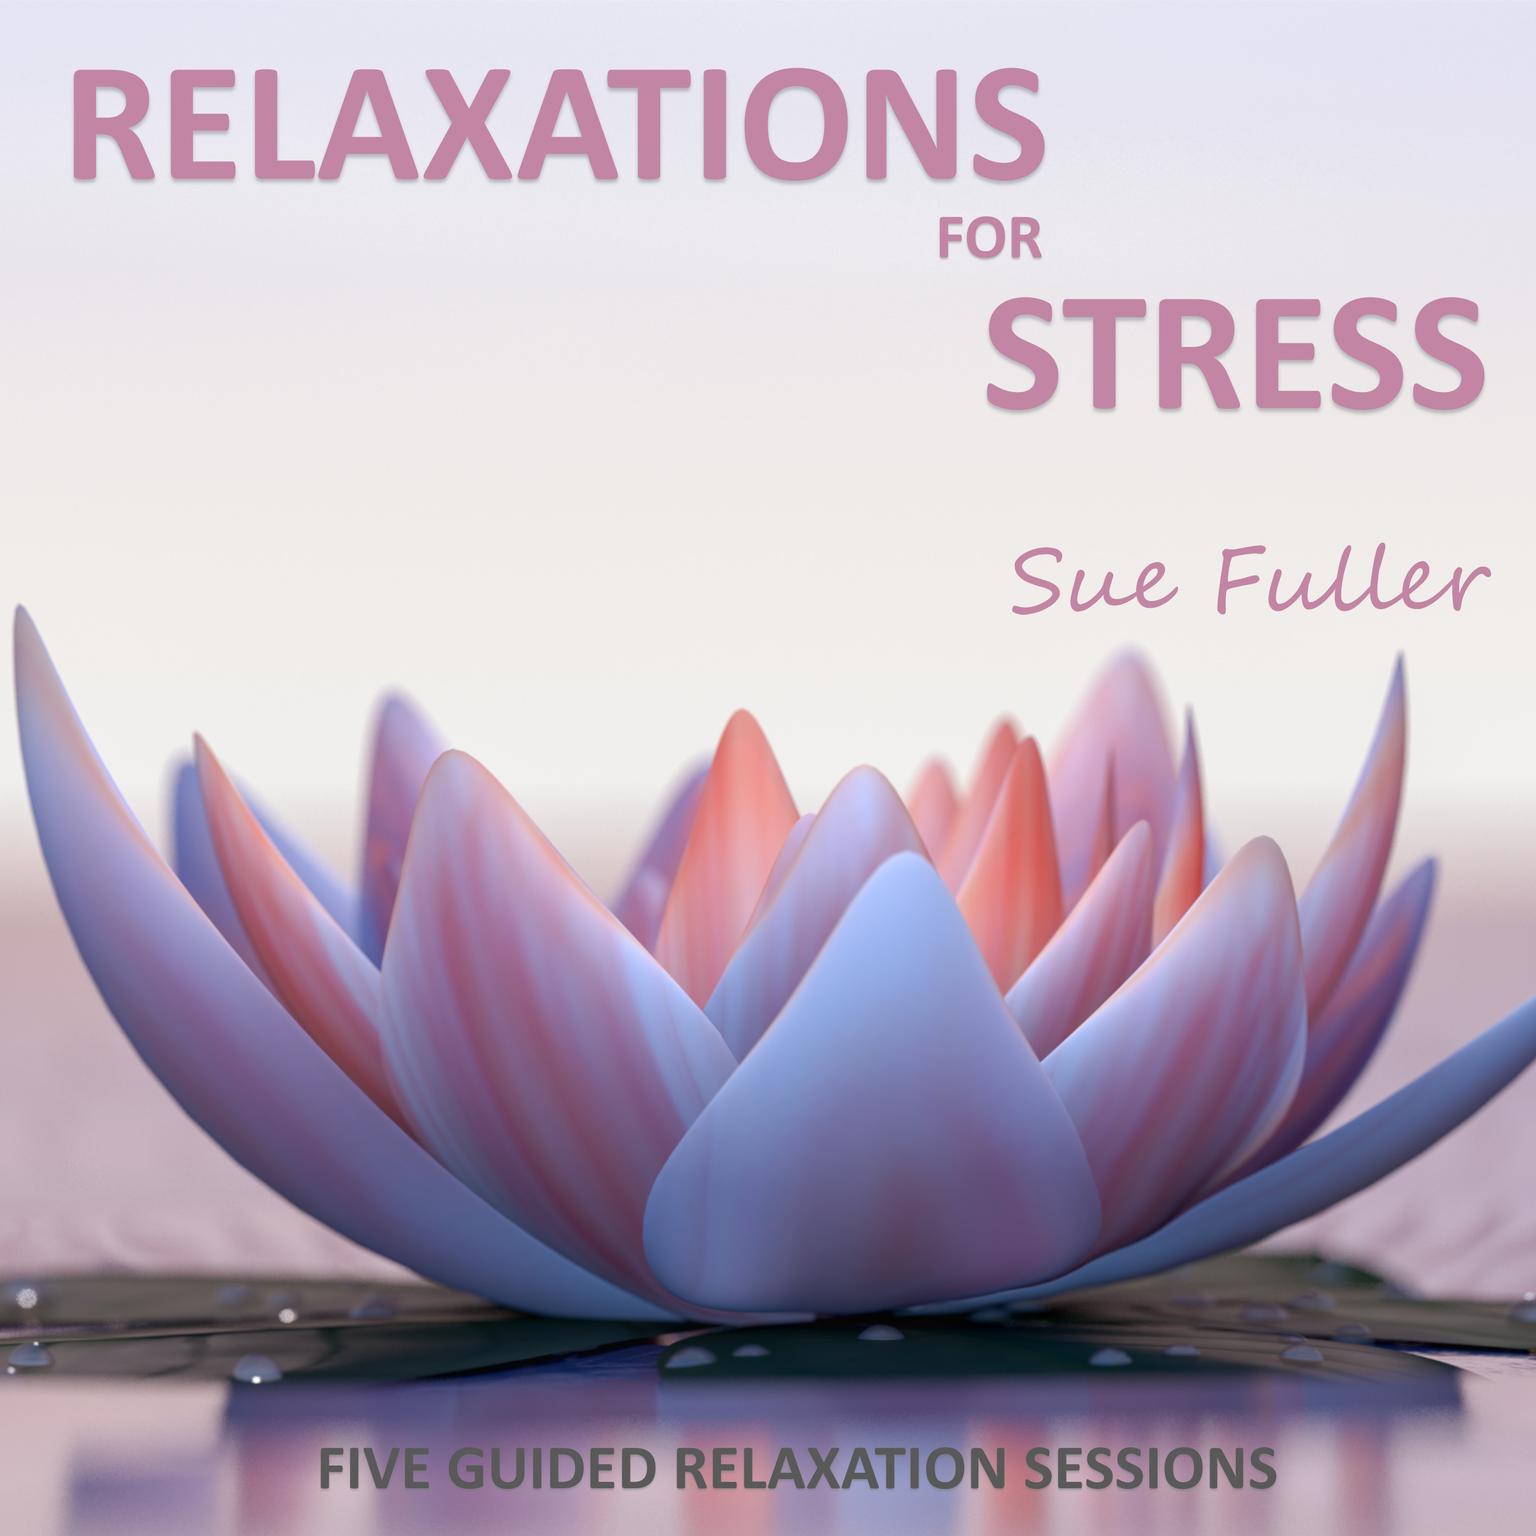 Relaxations for Stress: 5 guided relaxation sessions to help balance stress levels Audiobook, by Sue Fuller